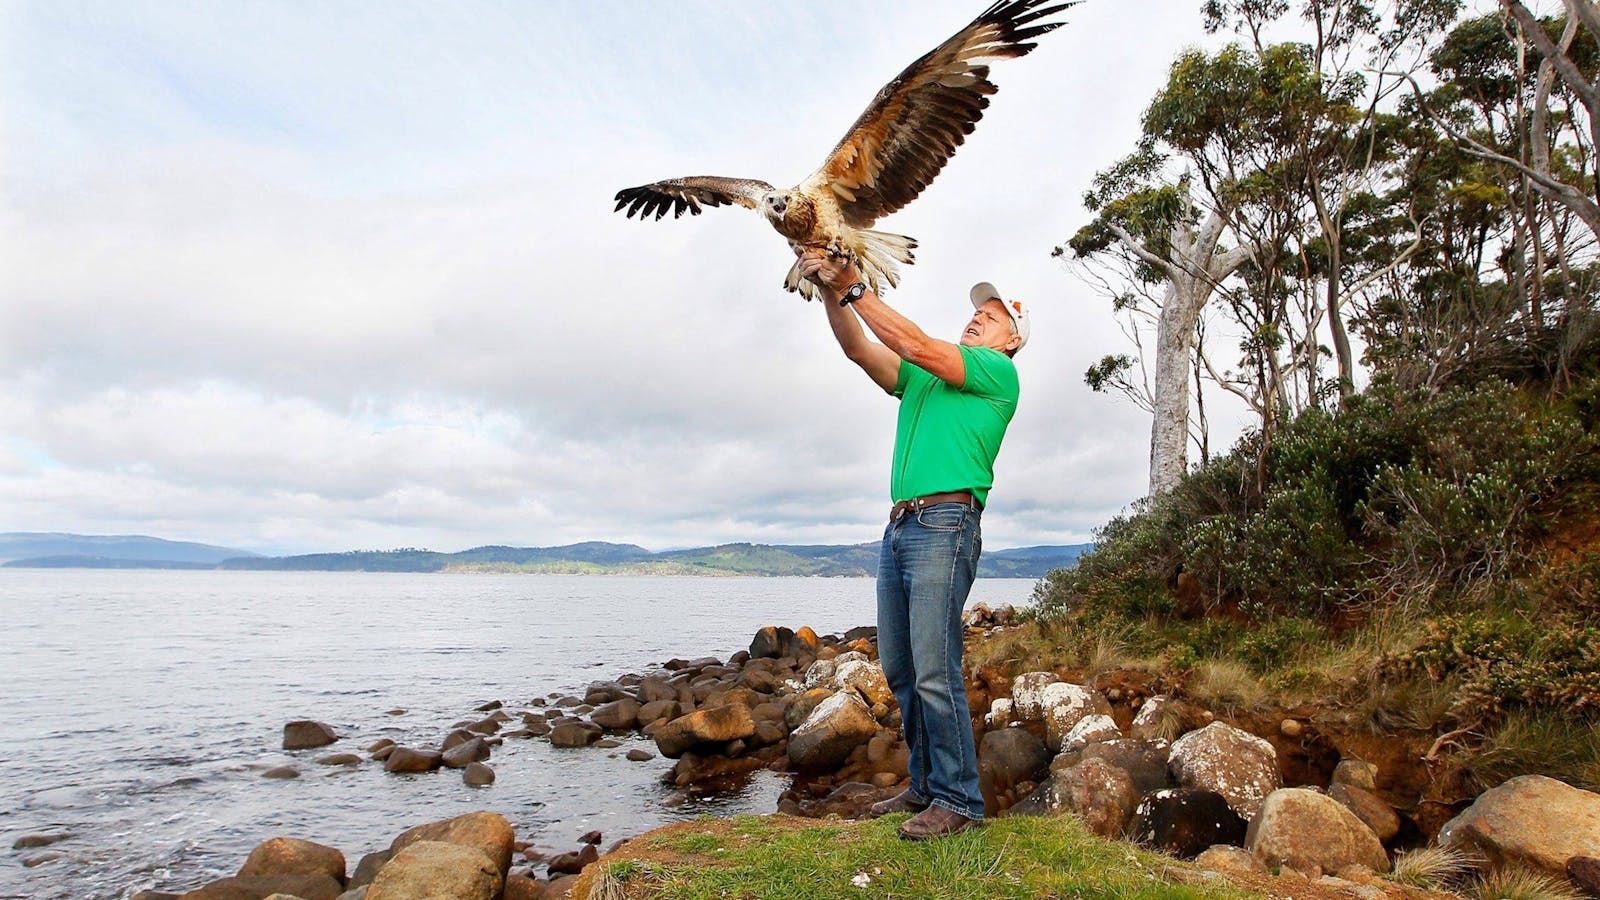 Craig Webb releasing an eagle into the wild